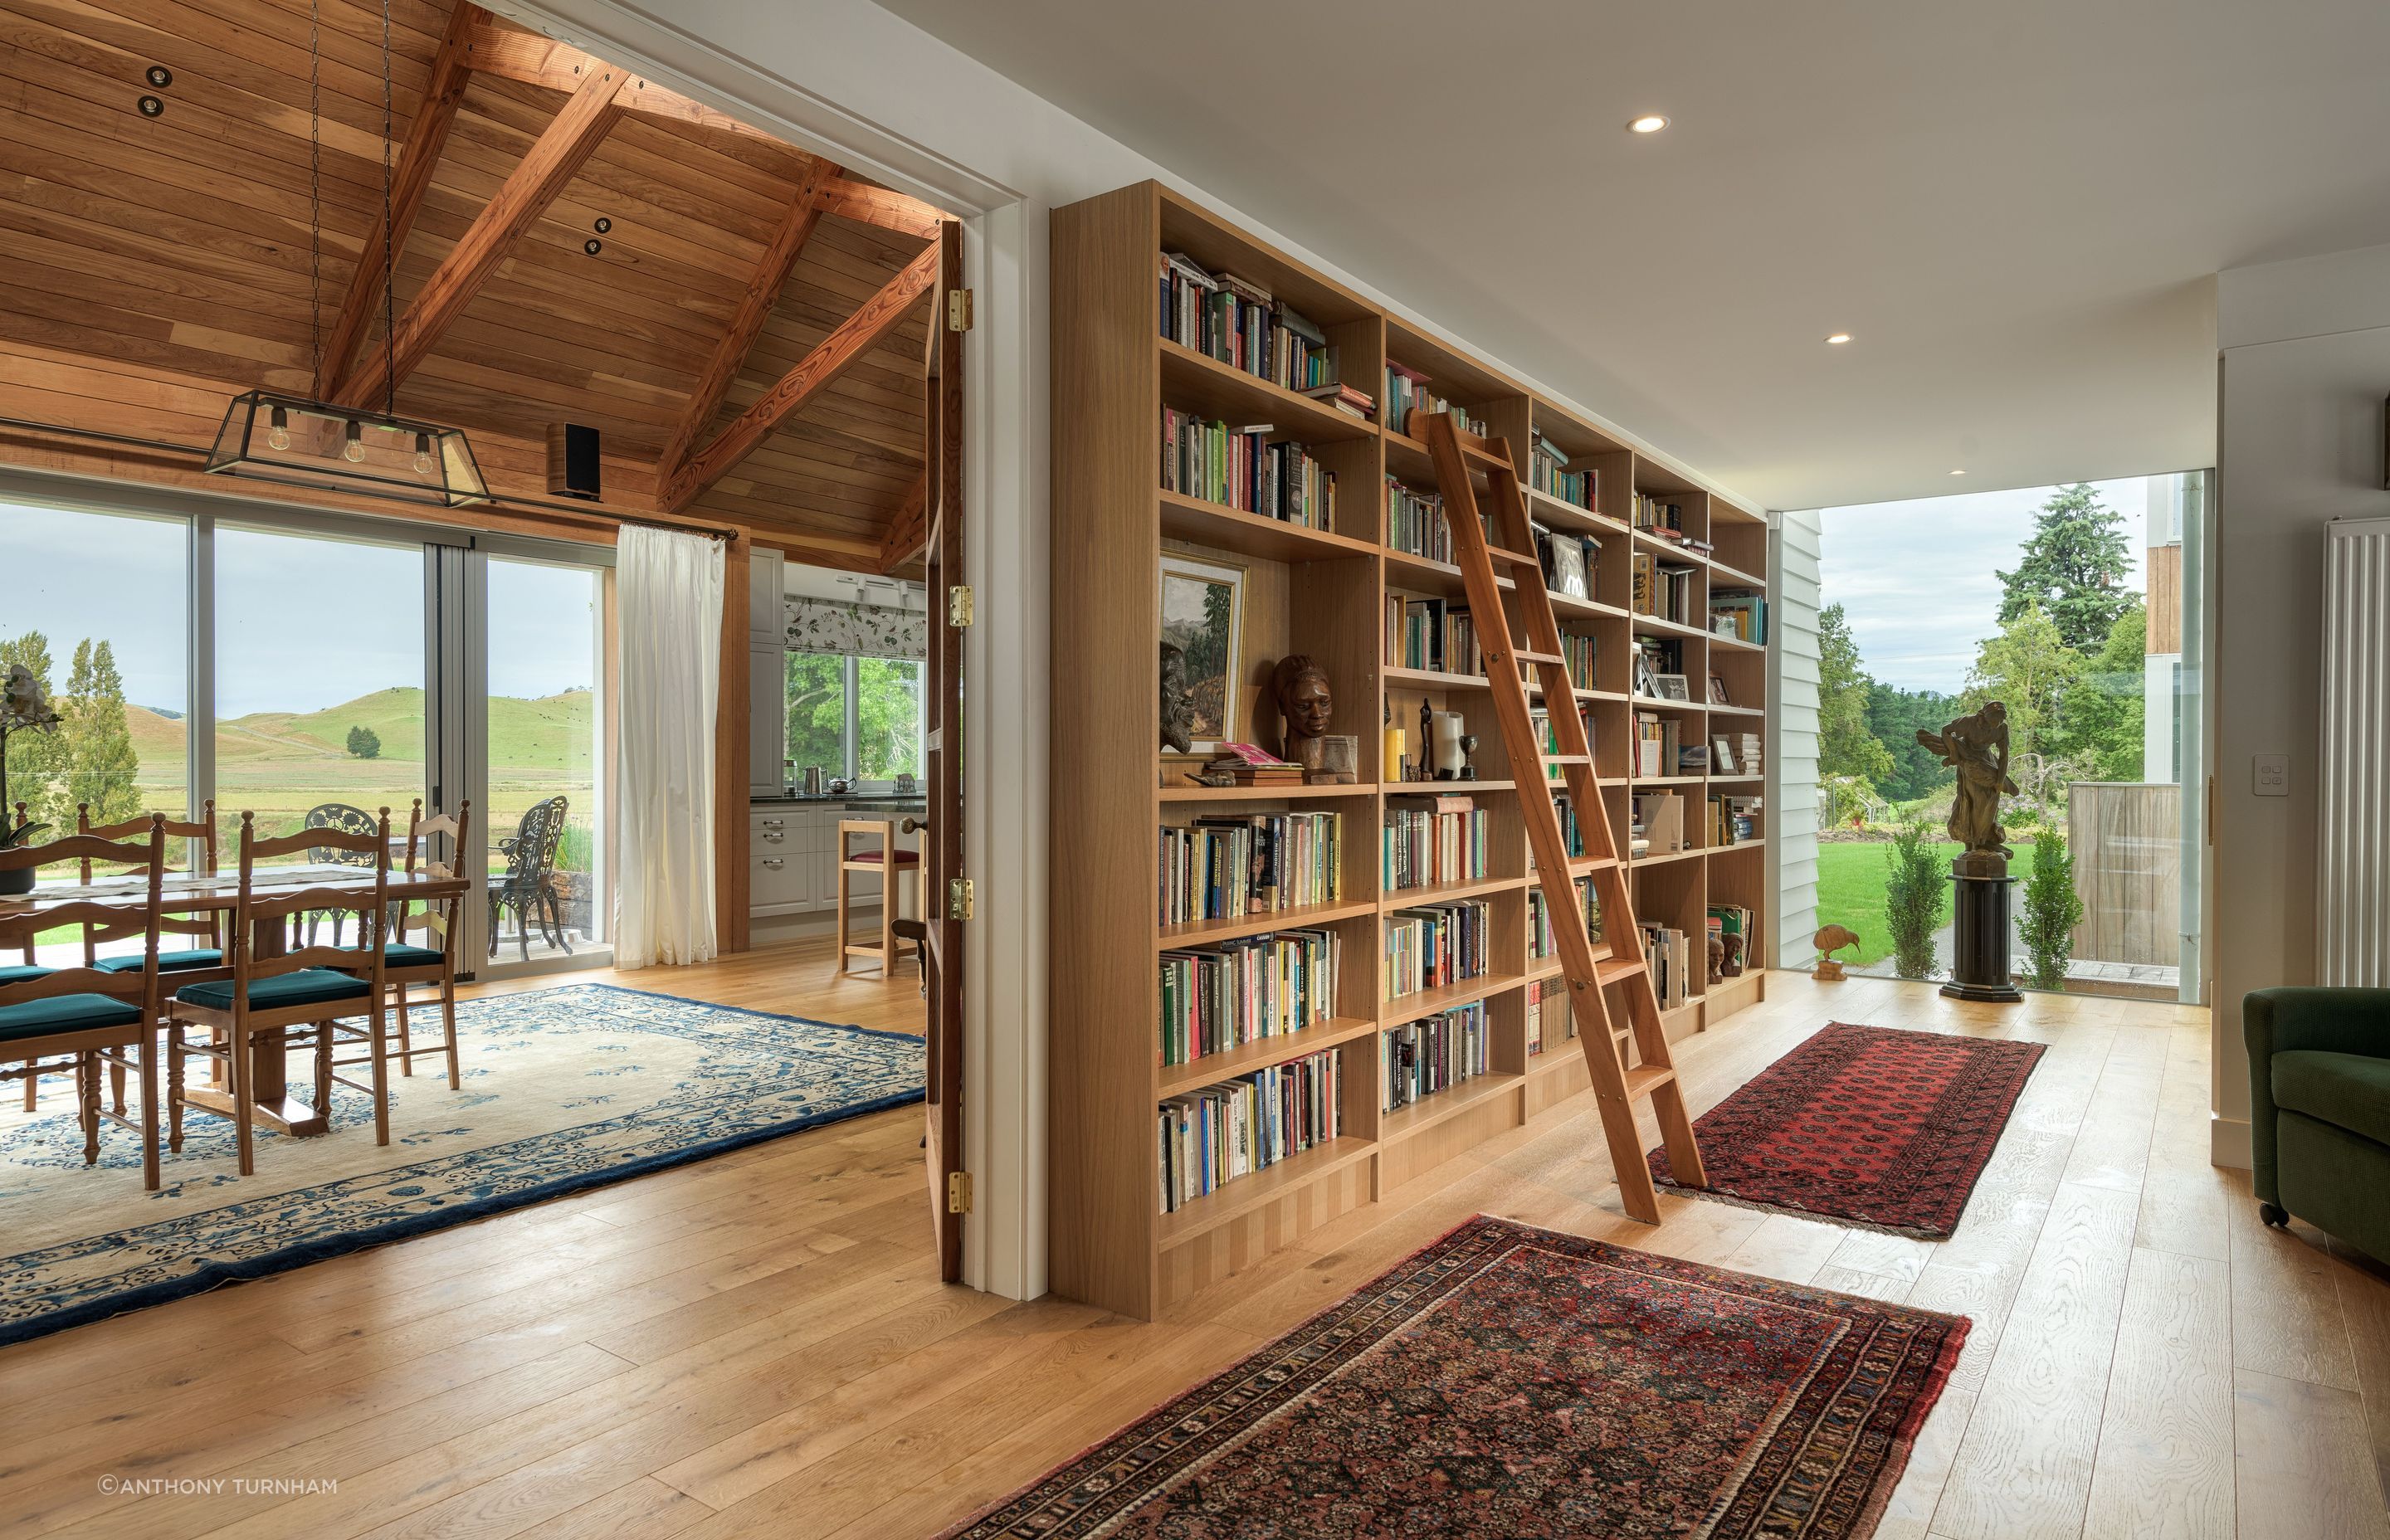 The homeowners have an extensive book collection, which is on display in the entrance gallery. The idea was to engage with the books every day rather than having a traditional library tucked away.